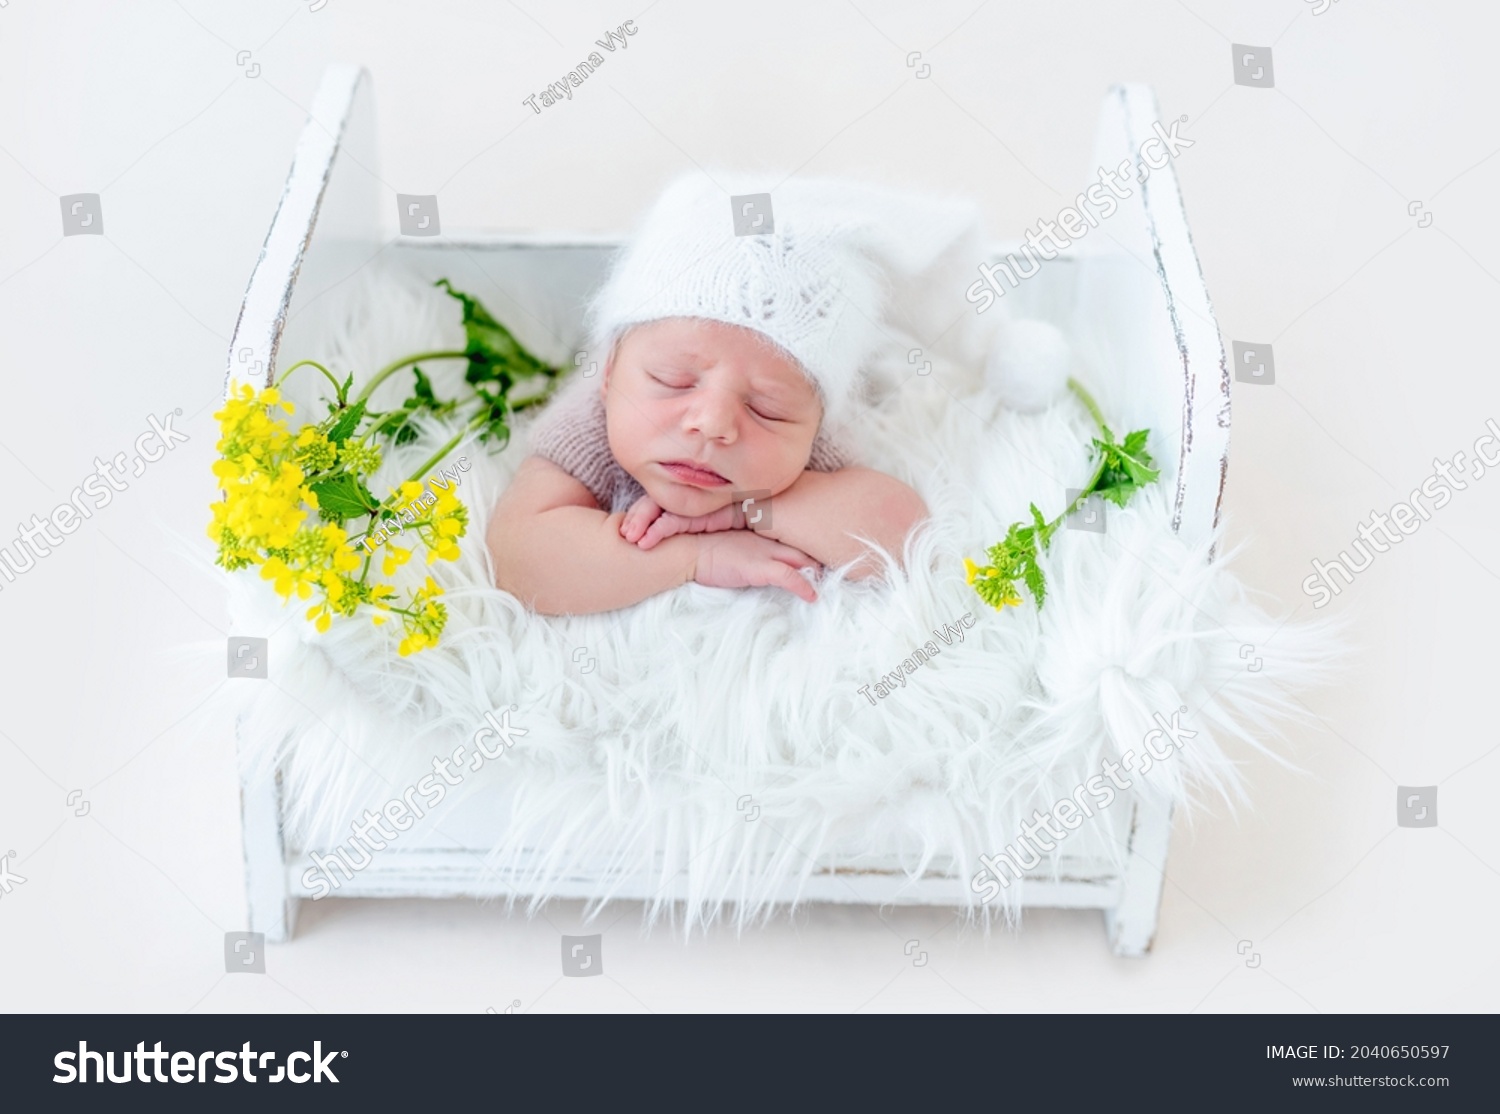 Adorable newborn baby boy sleeping on his tummy in white wooden bed with yellow flowers. Cute infant kid wearing knitted hat napping during studio photoshoot #2040650597